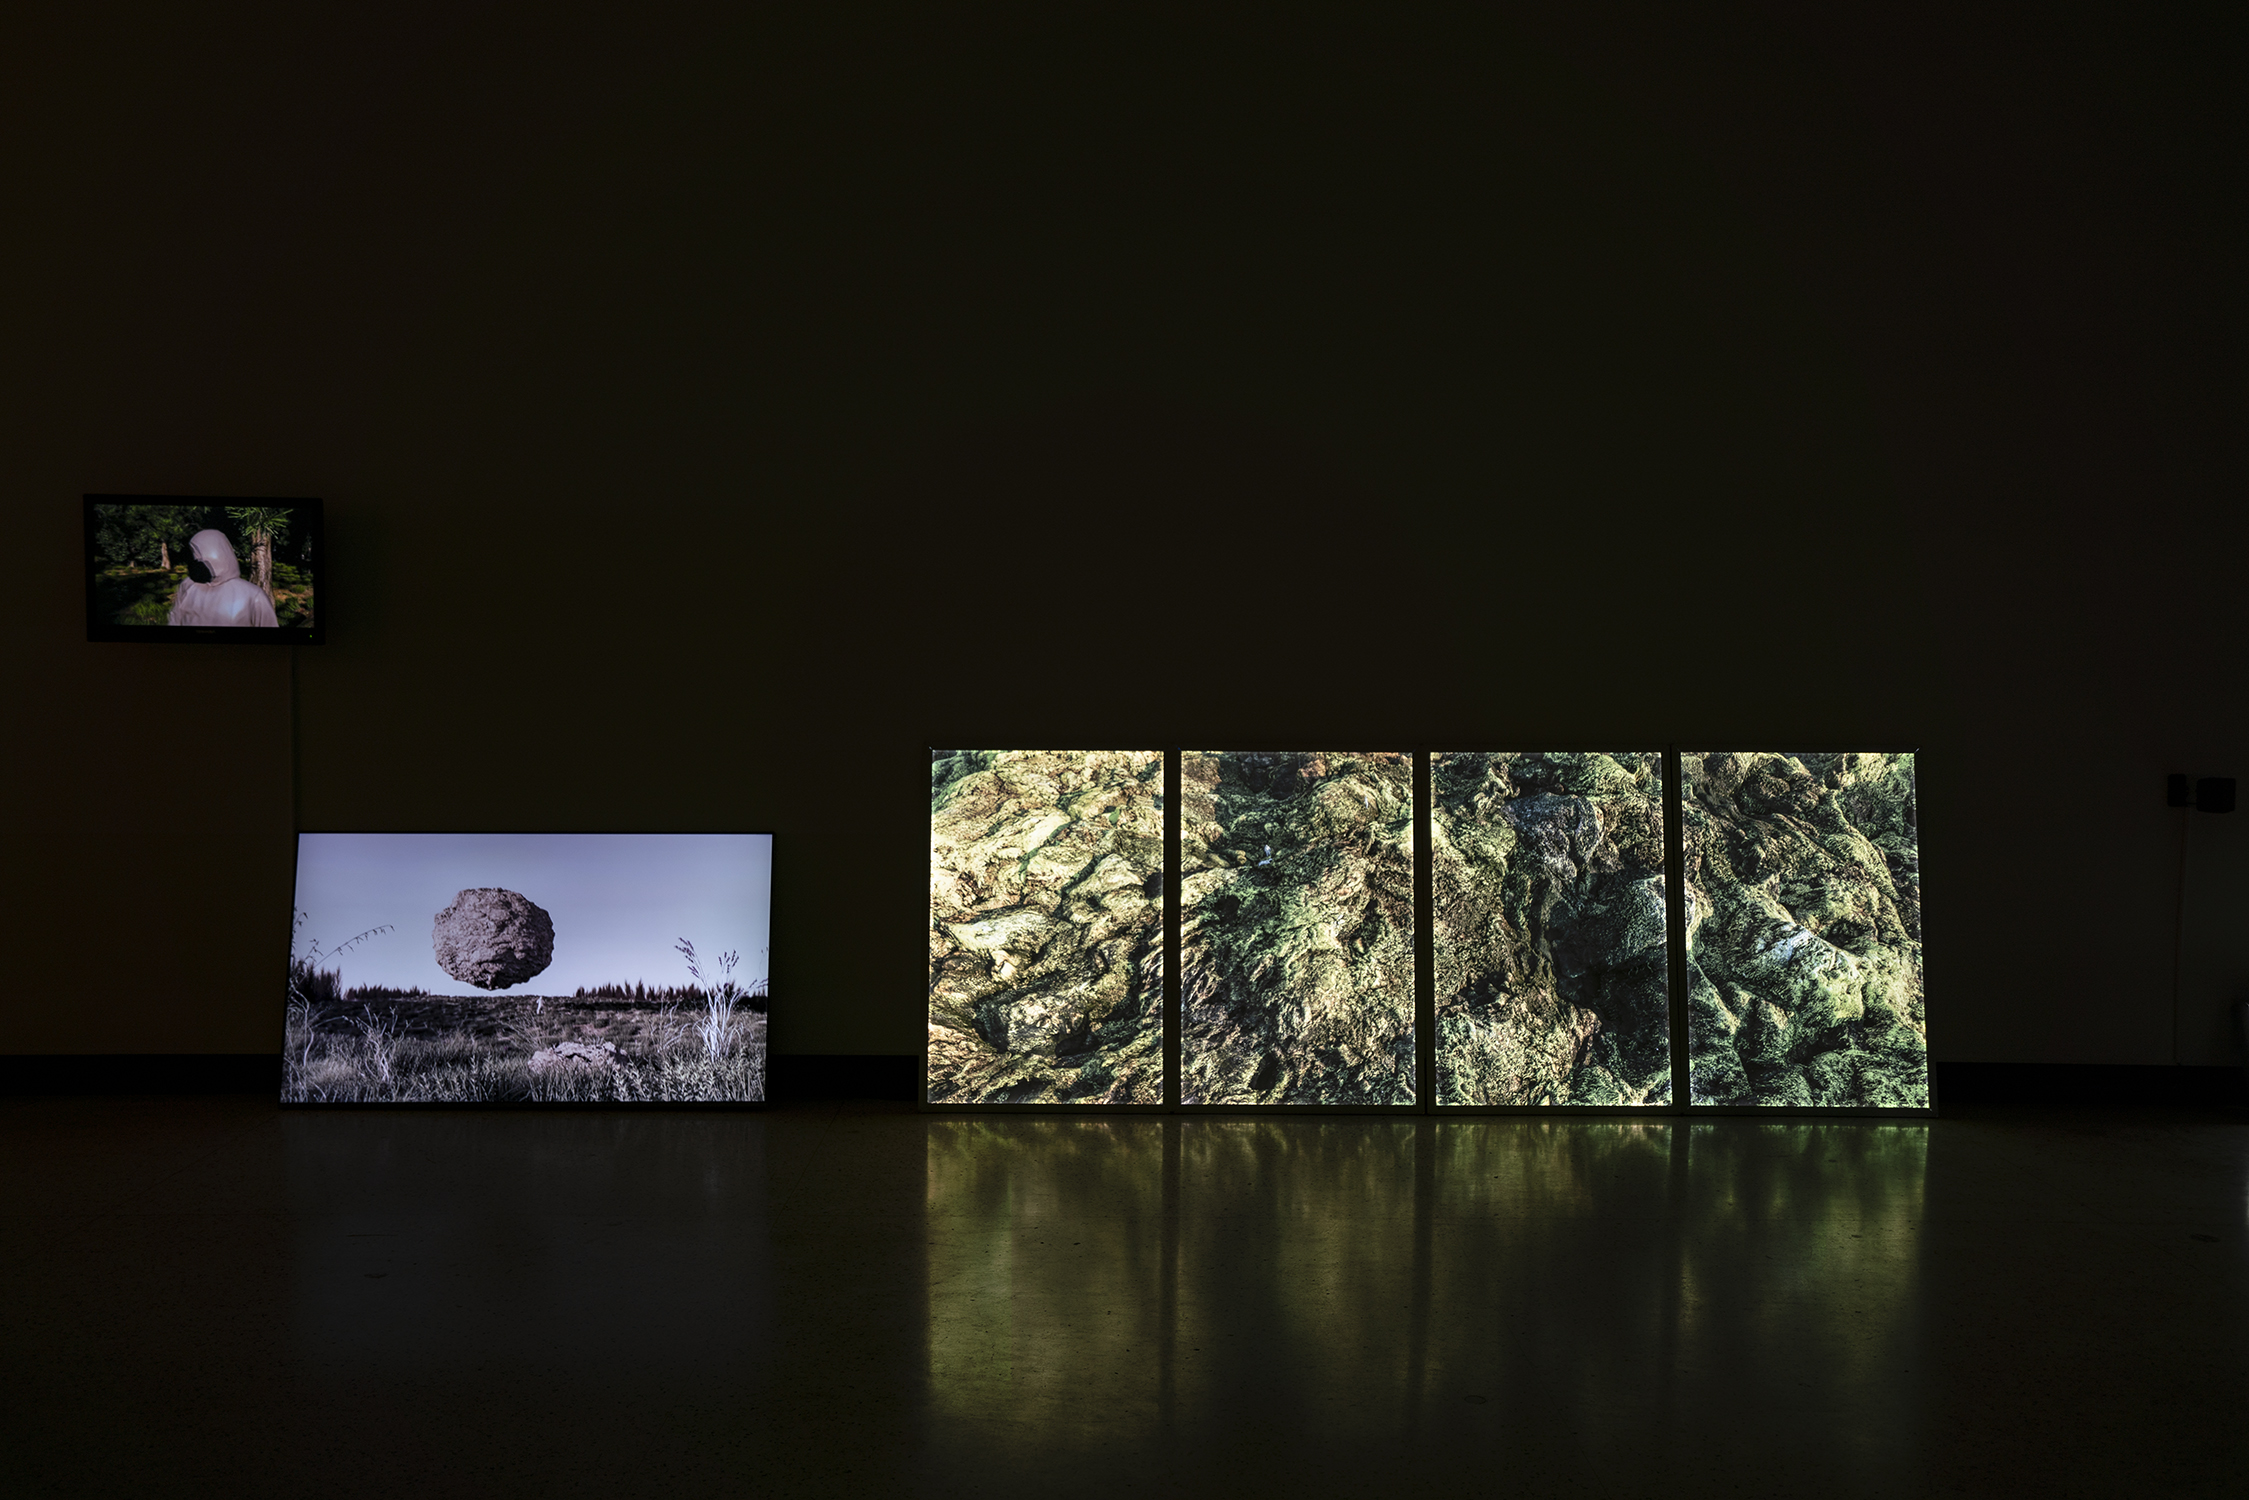 "to Witness" - 3 videos on TV, single 1-minute video on TV, and 4 part light box photograph (3 x 8 feet)